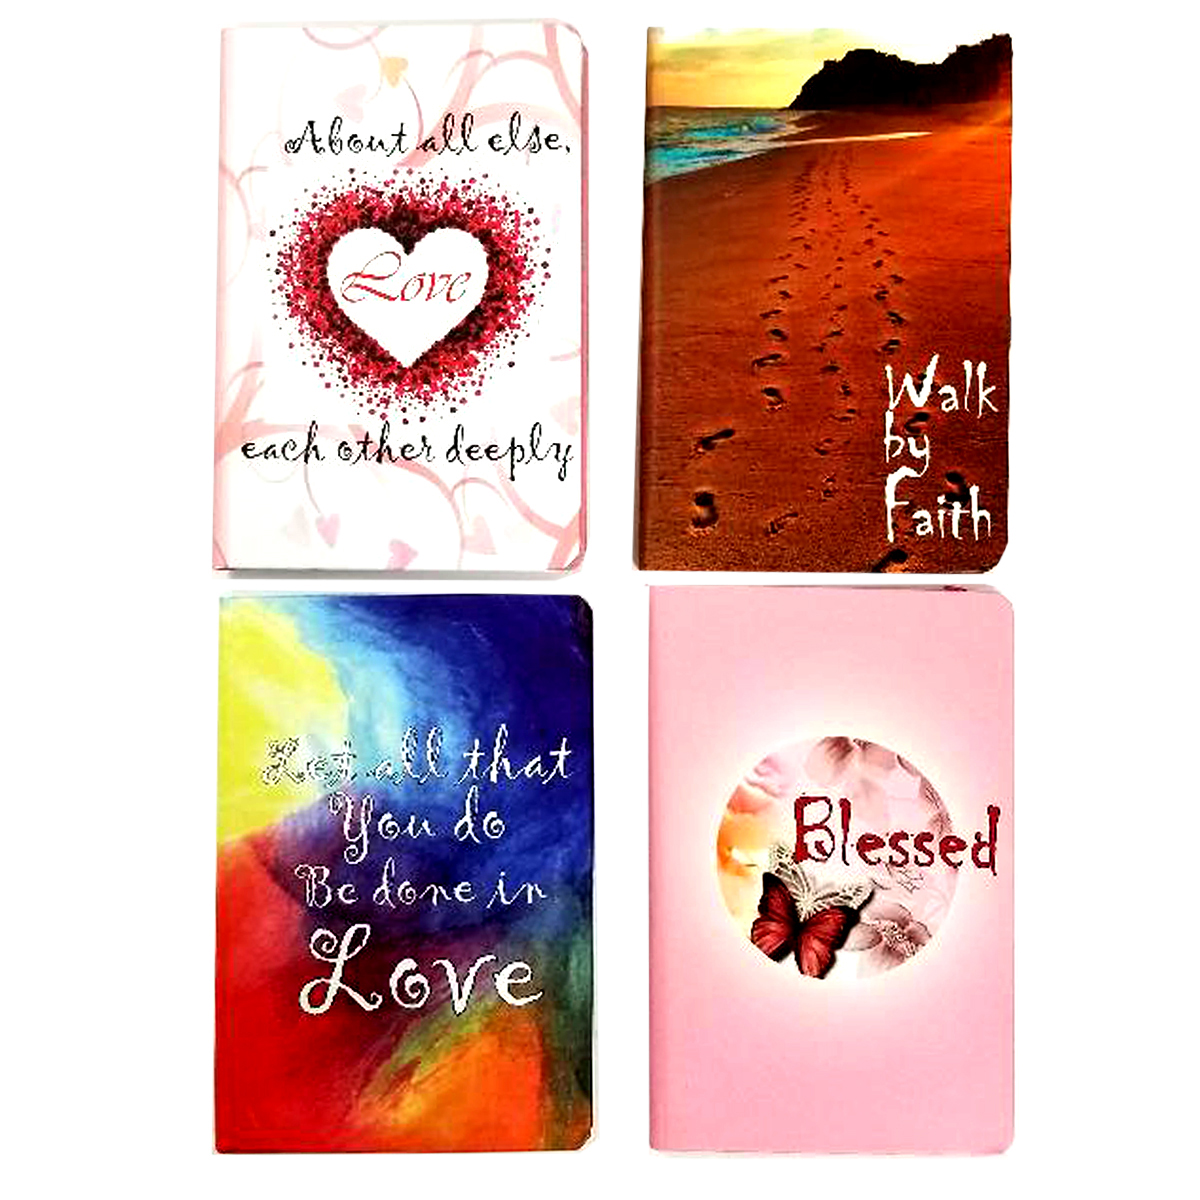 160-Page Hardcover Journals w/ Inspirational Messages